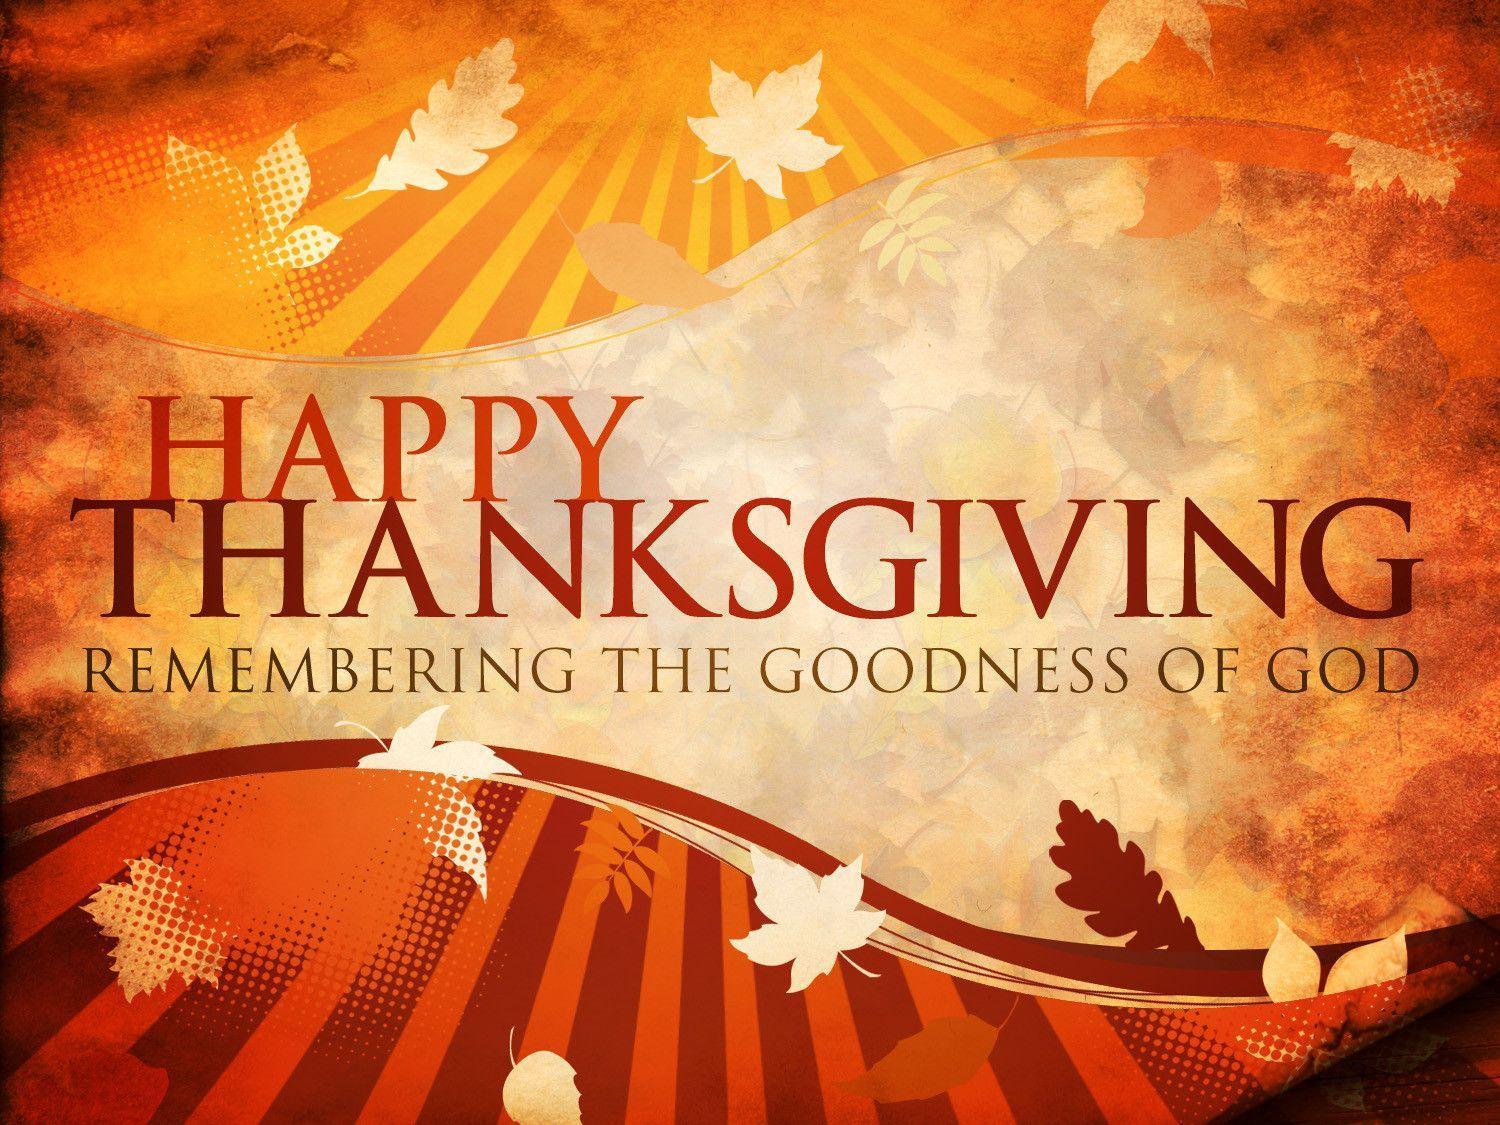 Happy Thanksgiving Picture, image, Pics, Photo, Wallpaper 2014